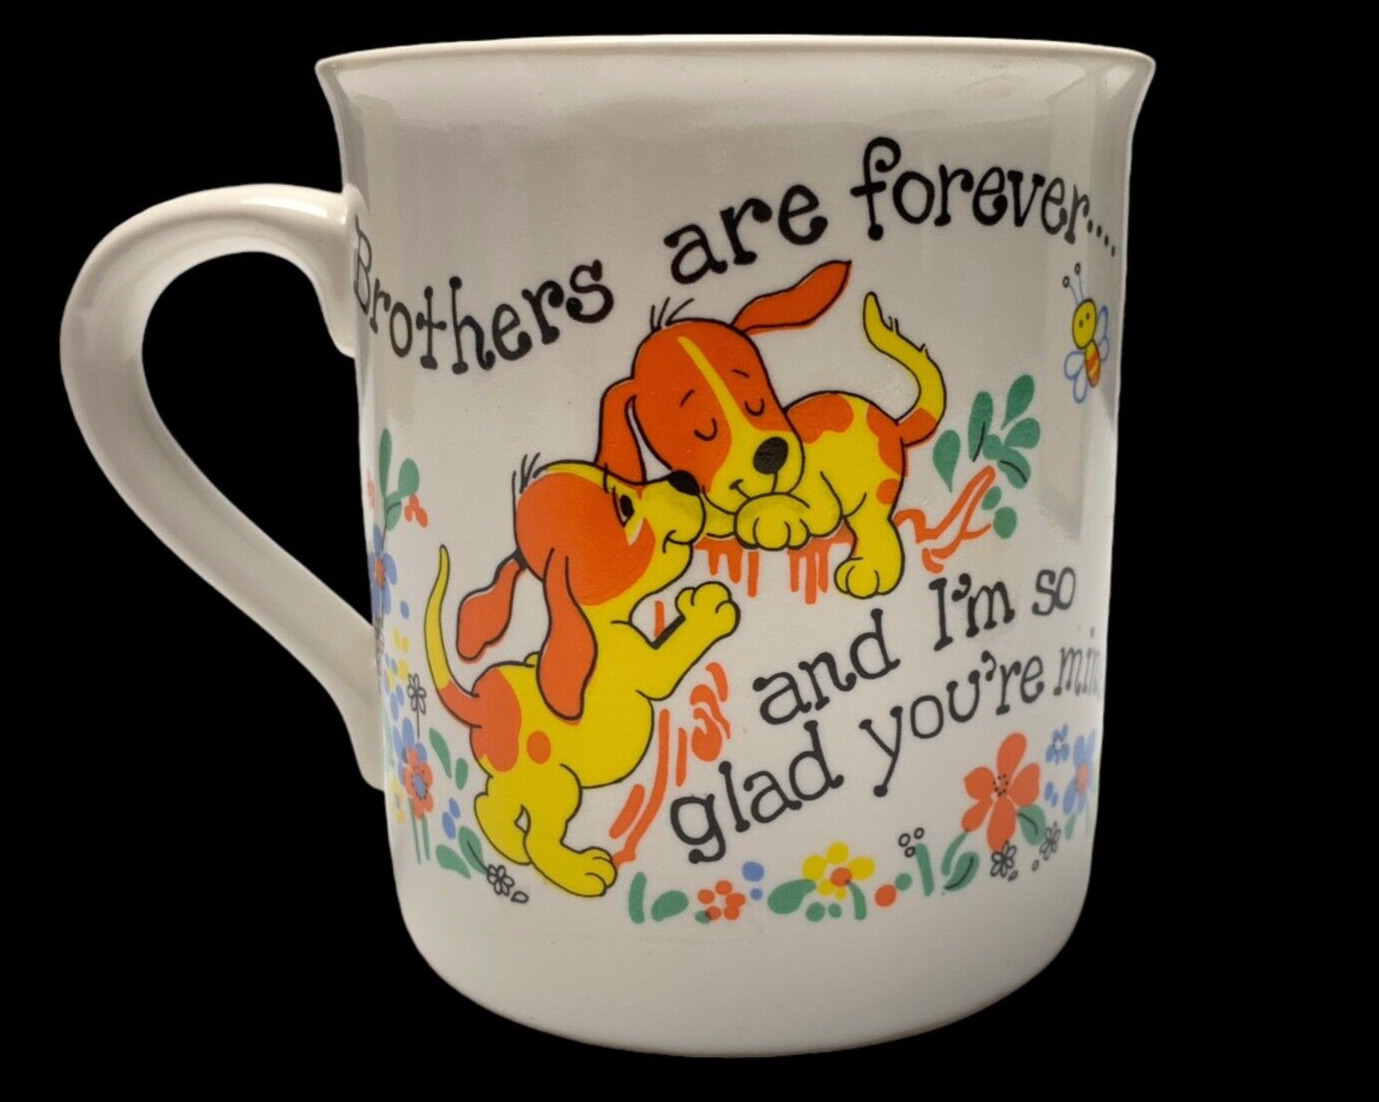 Brothers Are Forever I am So Glad You Are Mine Coffee Mug Cup Dogs lid box Vtg